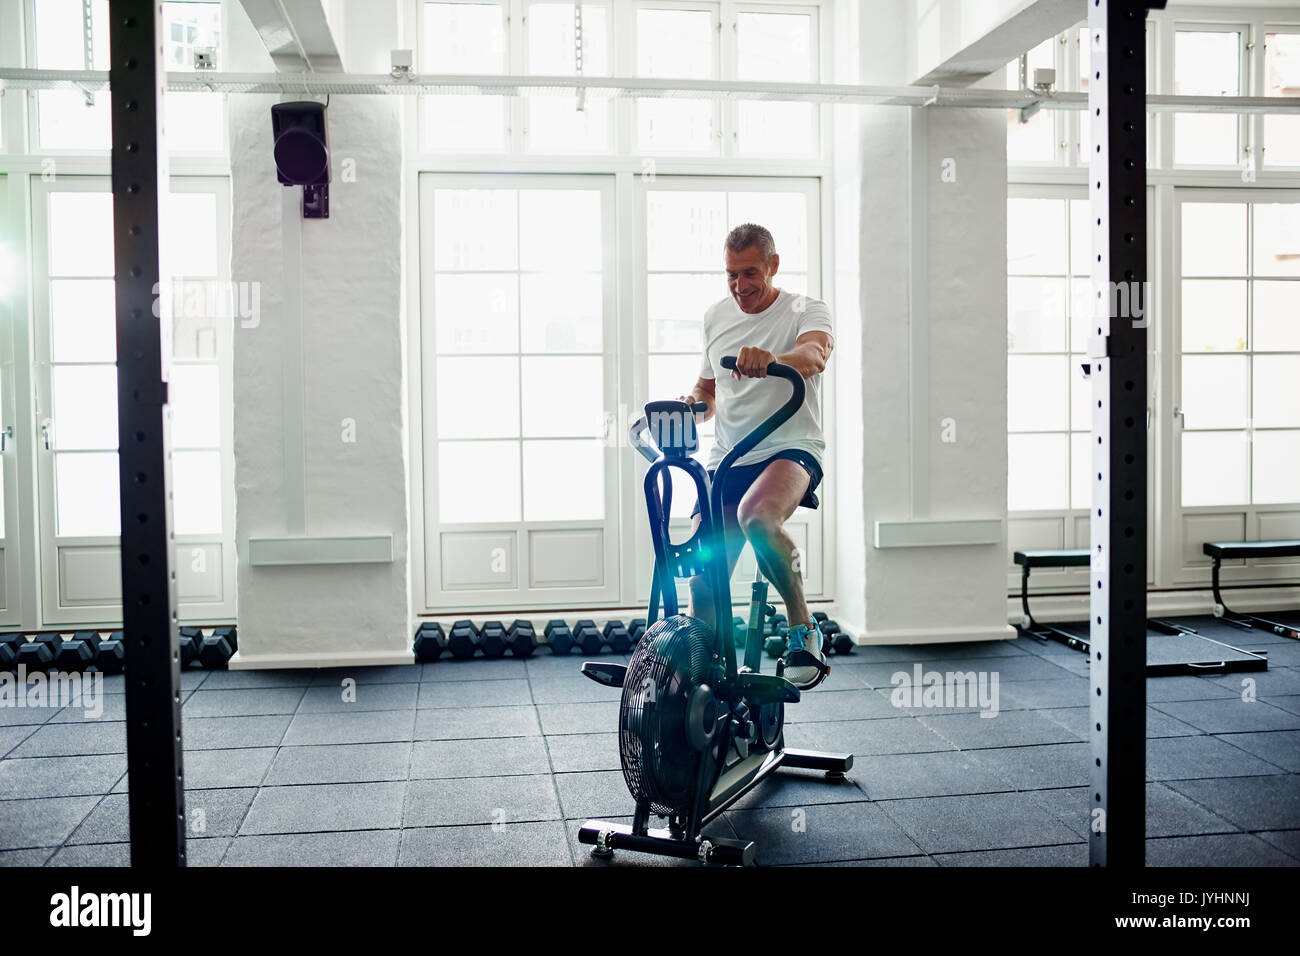 Smiling mature man in sportswear riding a stationary bike while working out alone at the gym Stock Photo